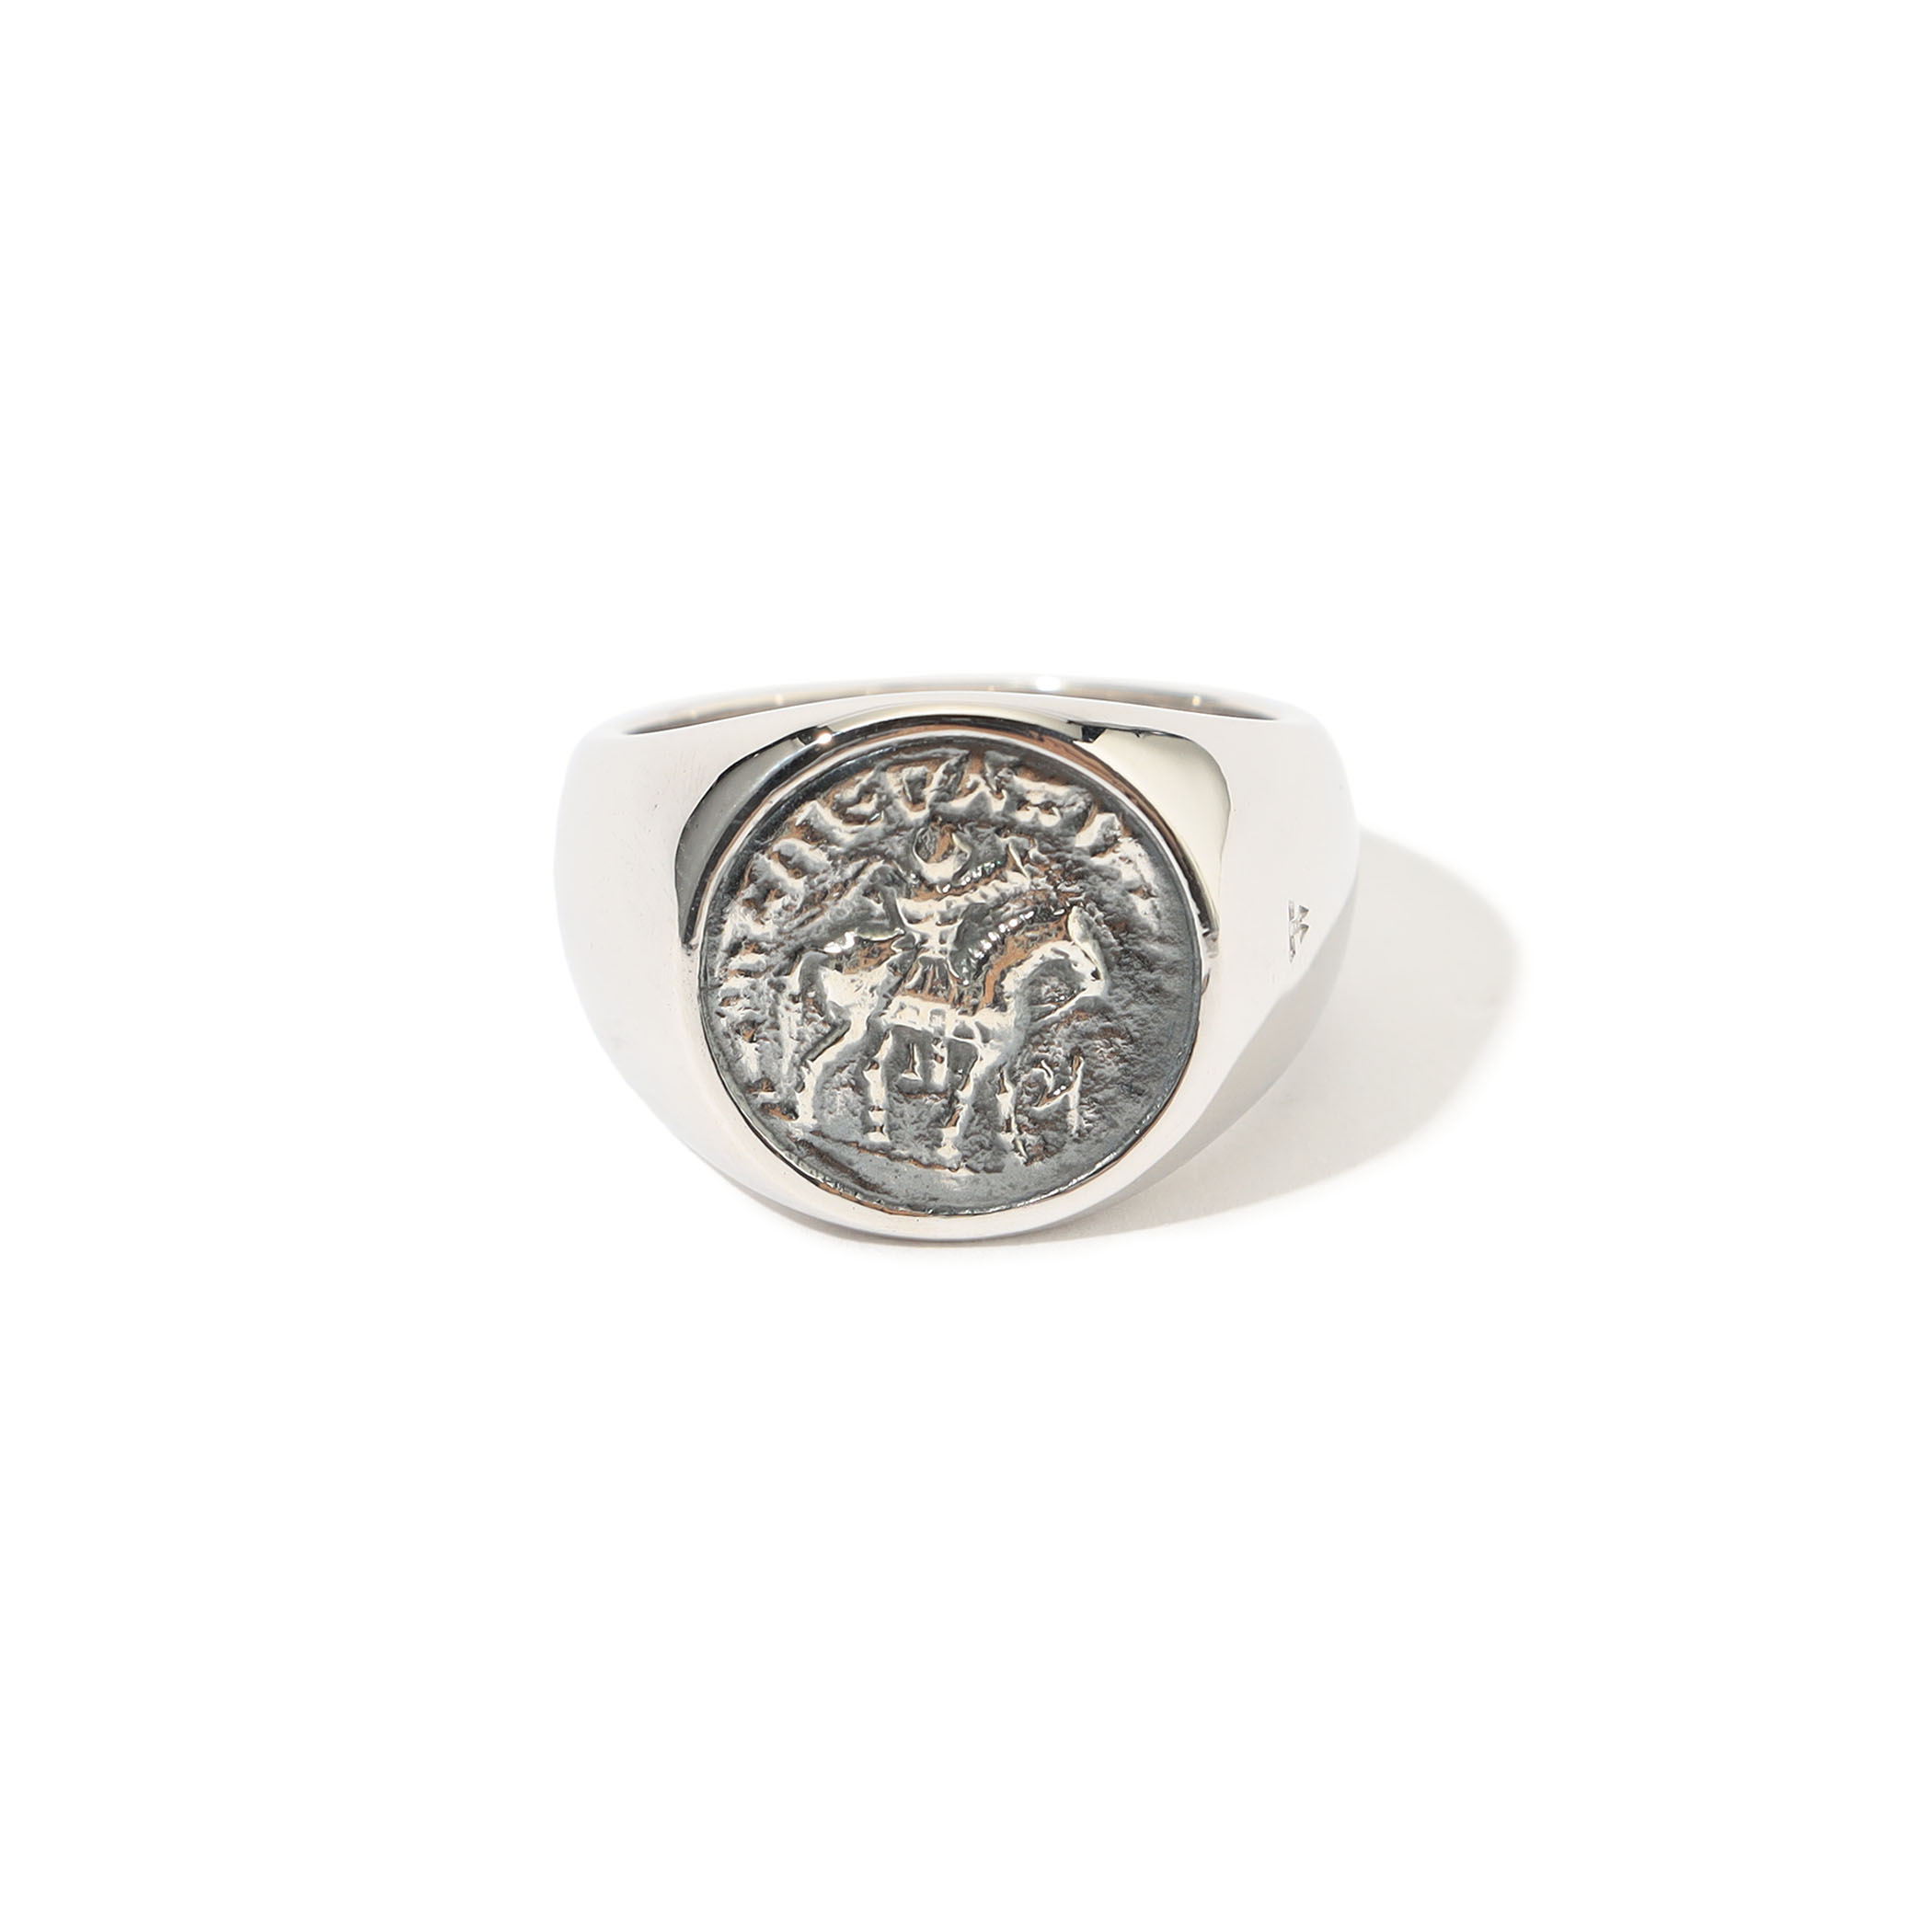 Tom wood coin ring